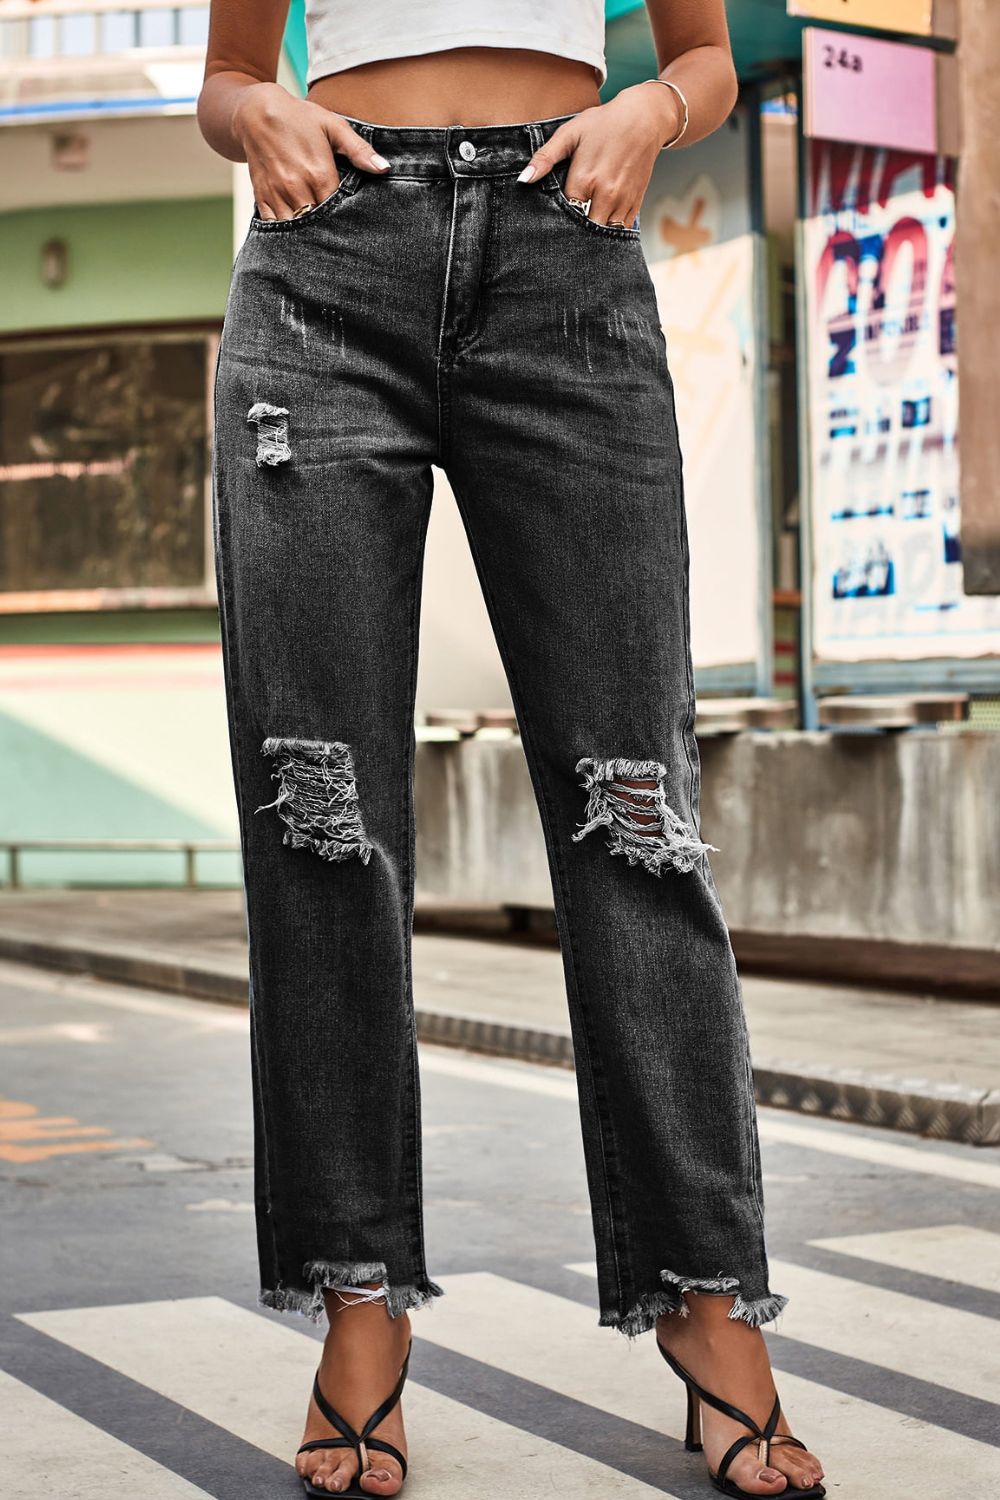 FIT RAGGED DENIM Distressed Buttoned Loose Fit Jeans